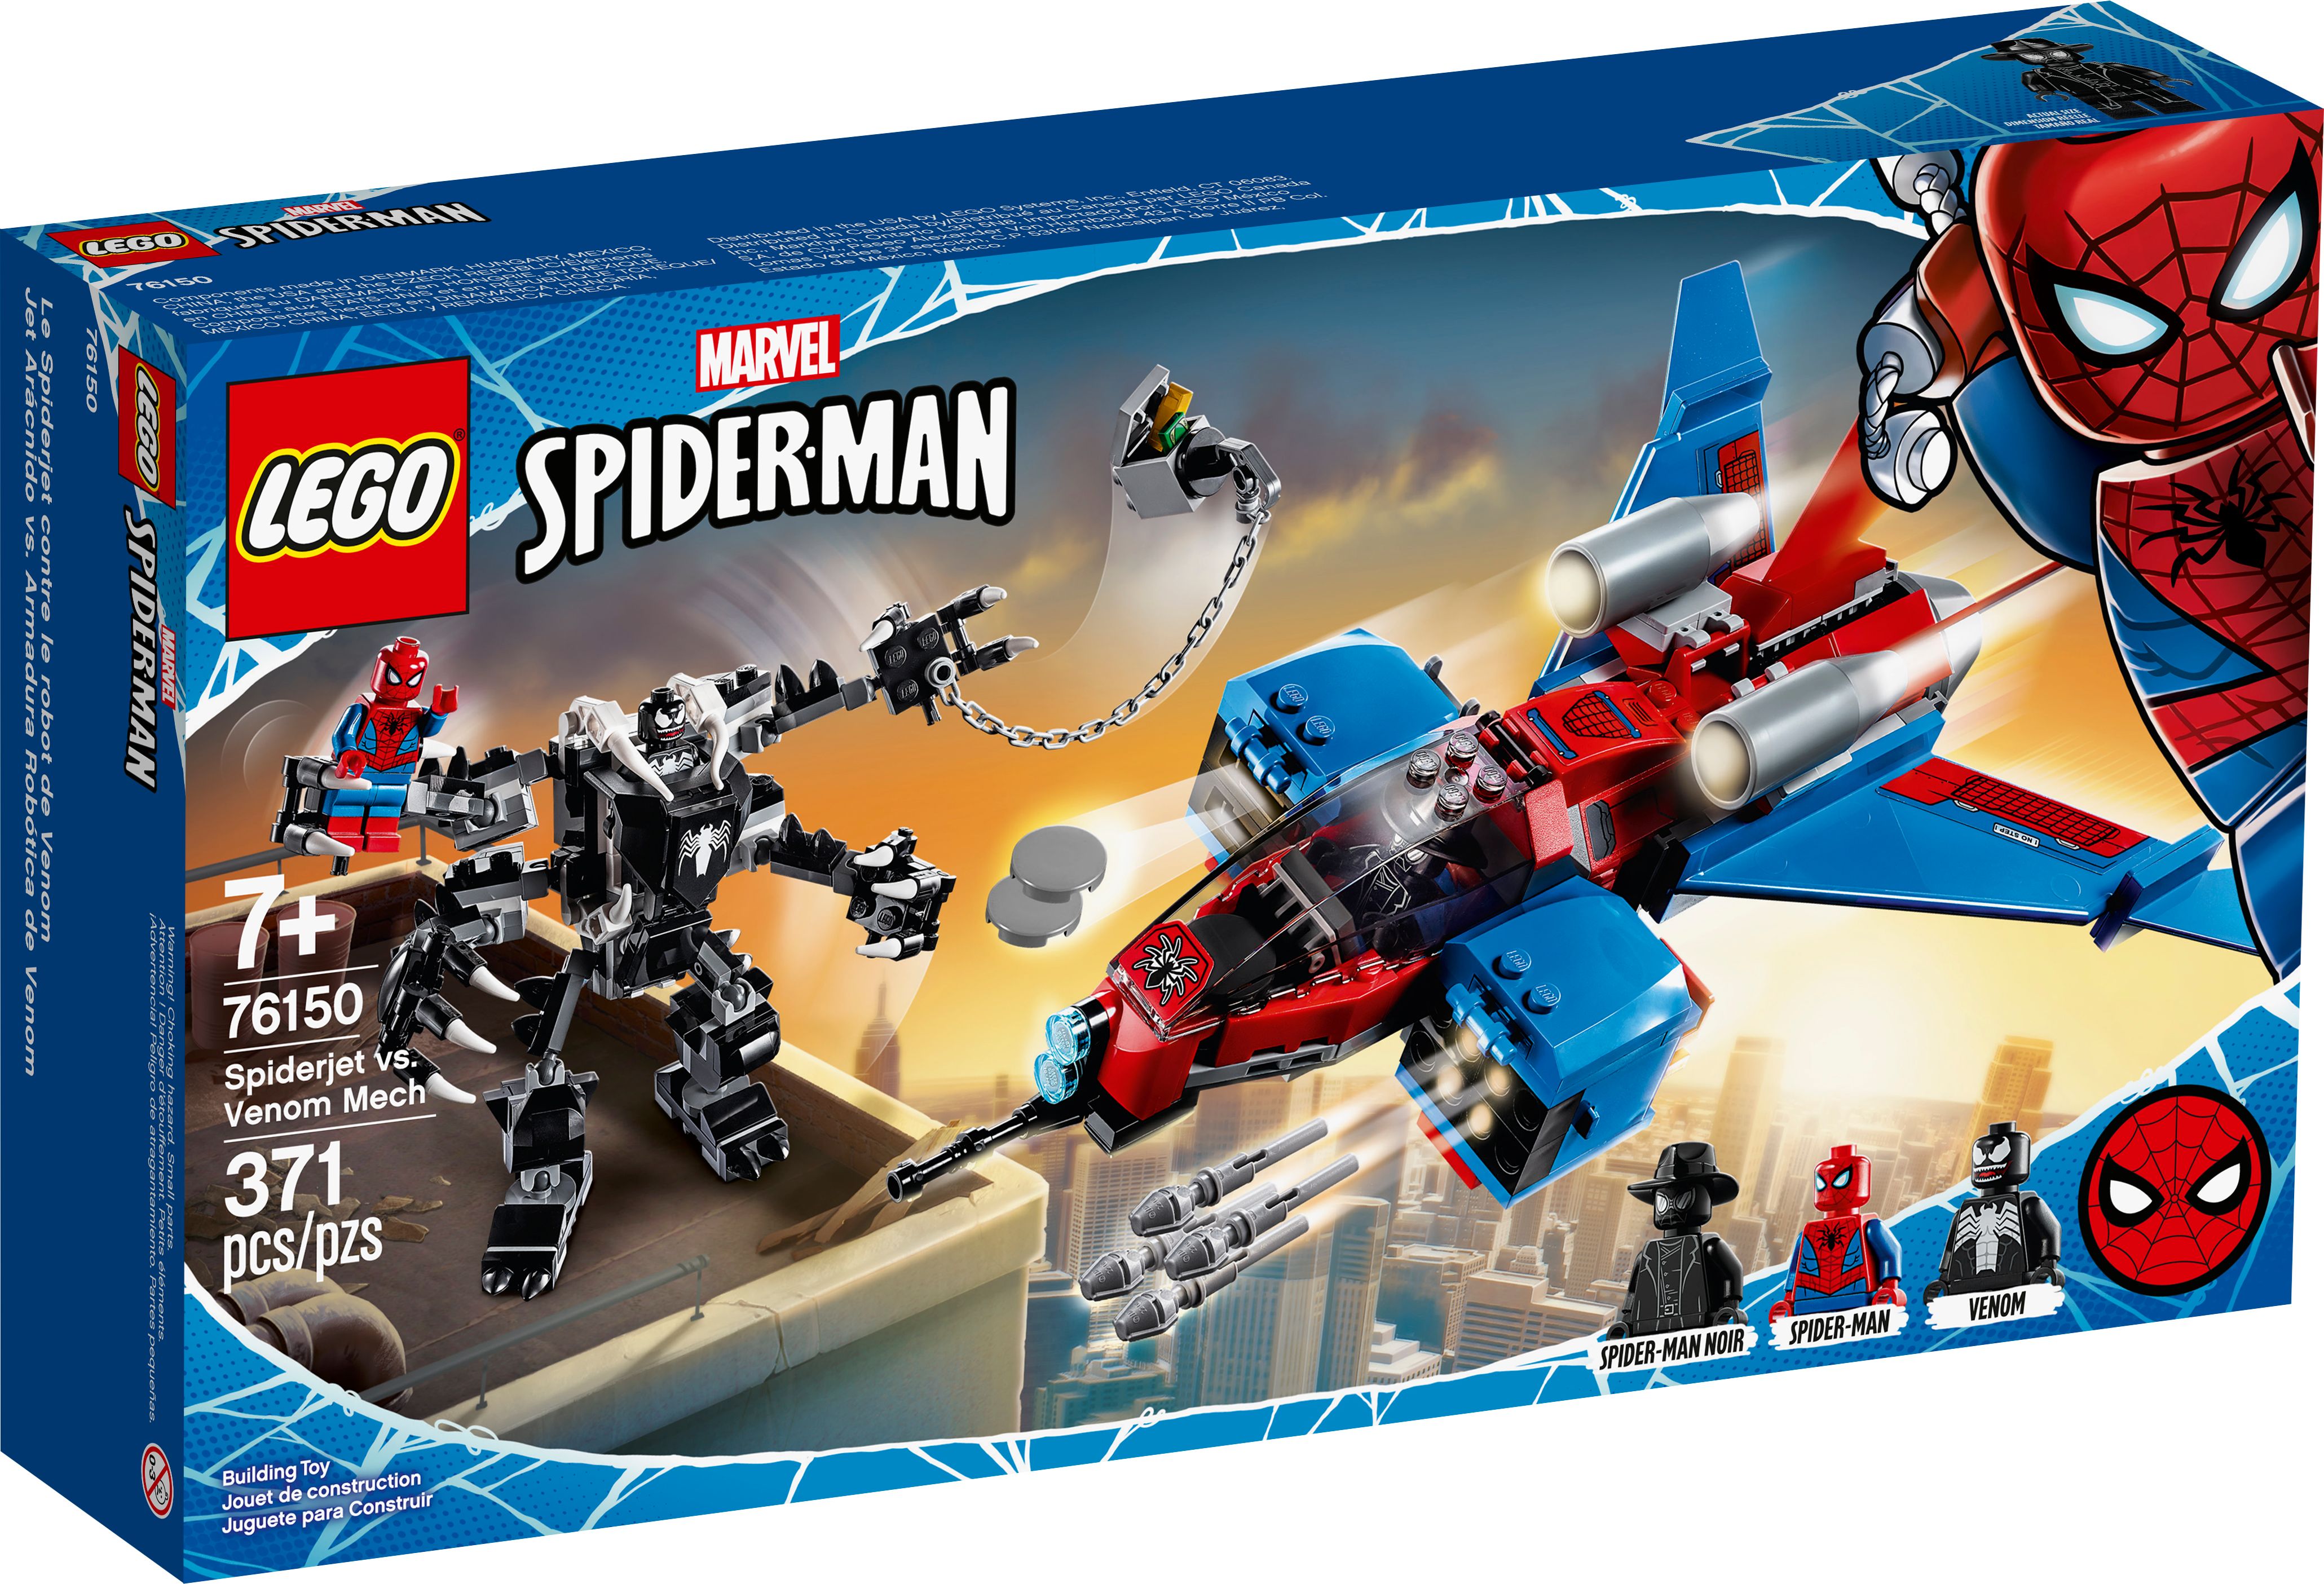 LEGO Marvel Spider-Man Spider-Jet vs Venom Mech 76150 Building Kit with Minifigures, Mech and Plane (371 Pieces) - image 5 of 7